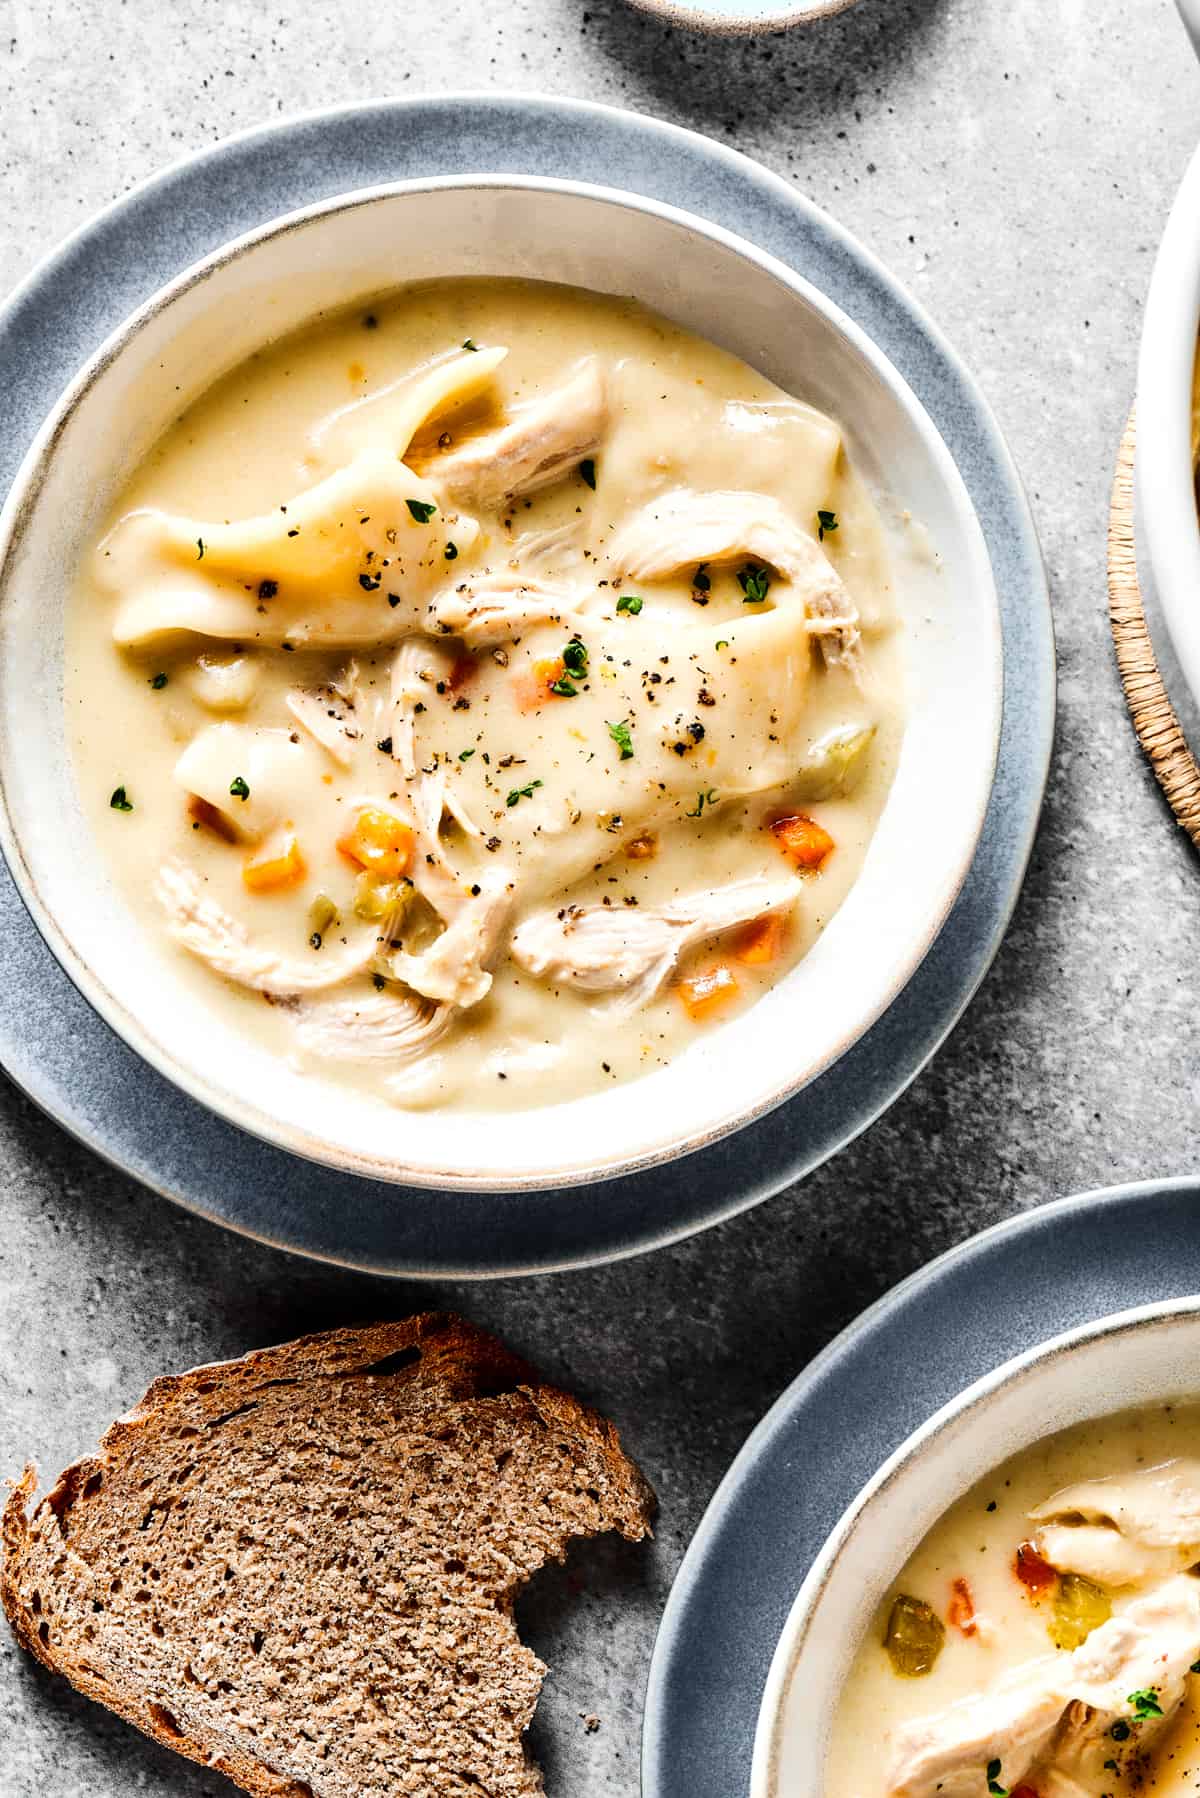 Creamy chicken and dumplings served into bowls.